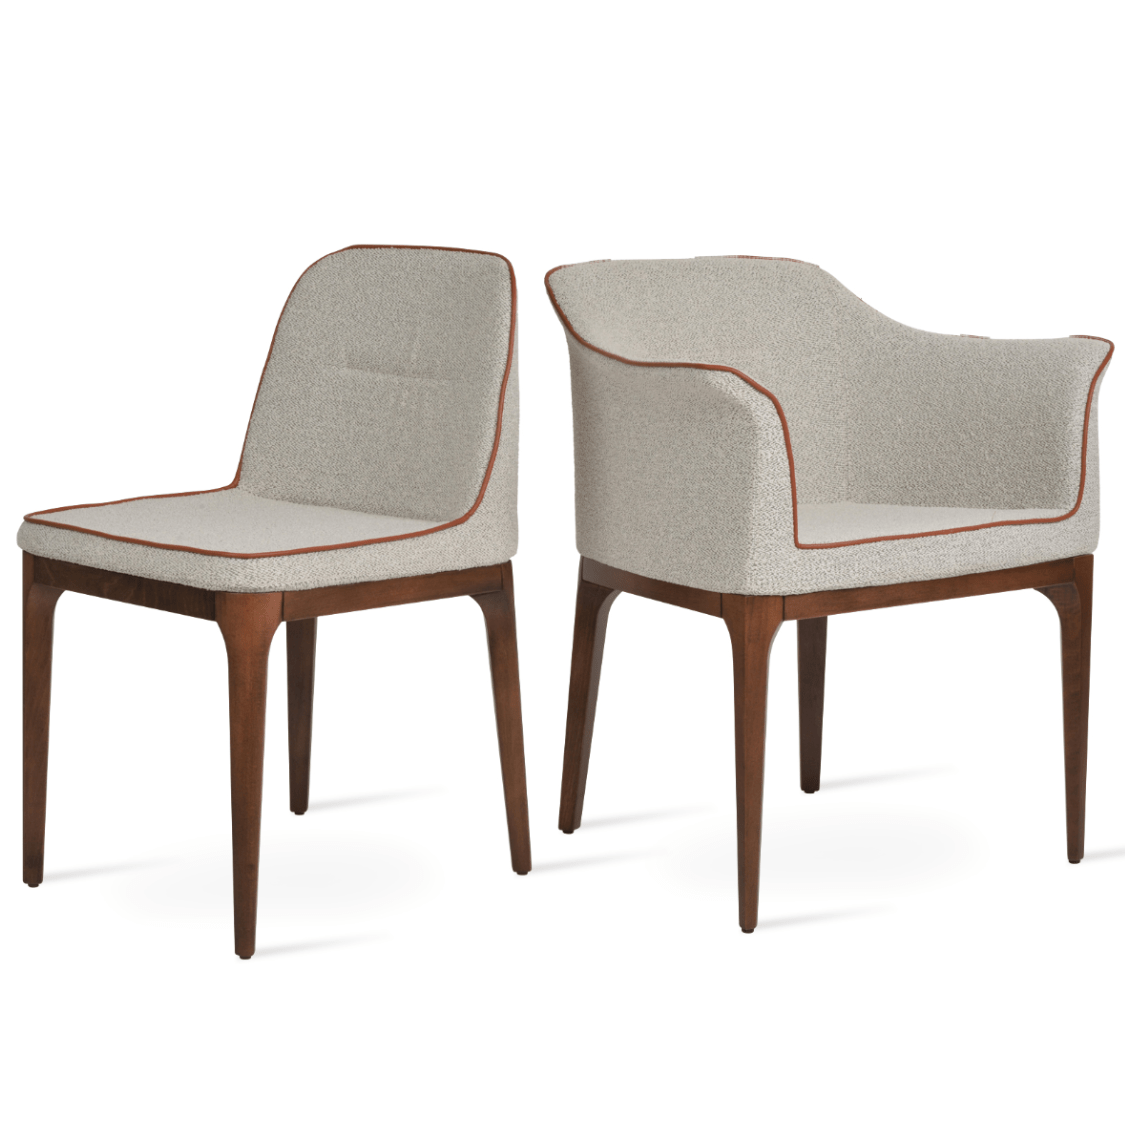 Sleek and modern dining chairs complementing a contemporary dining table